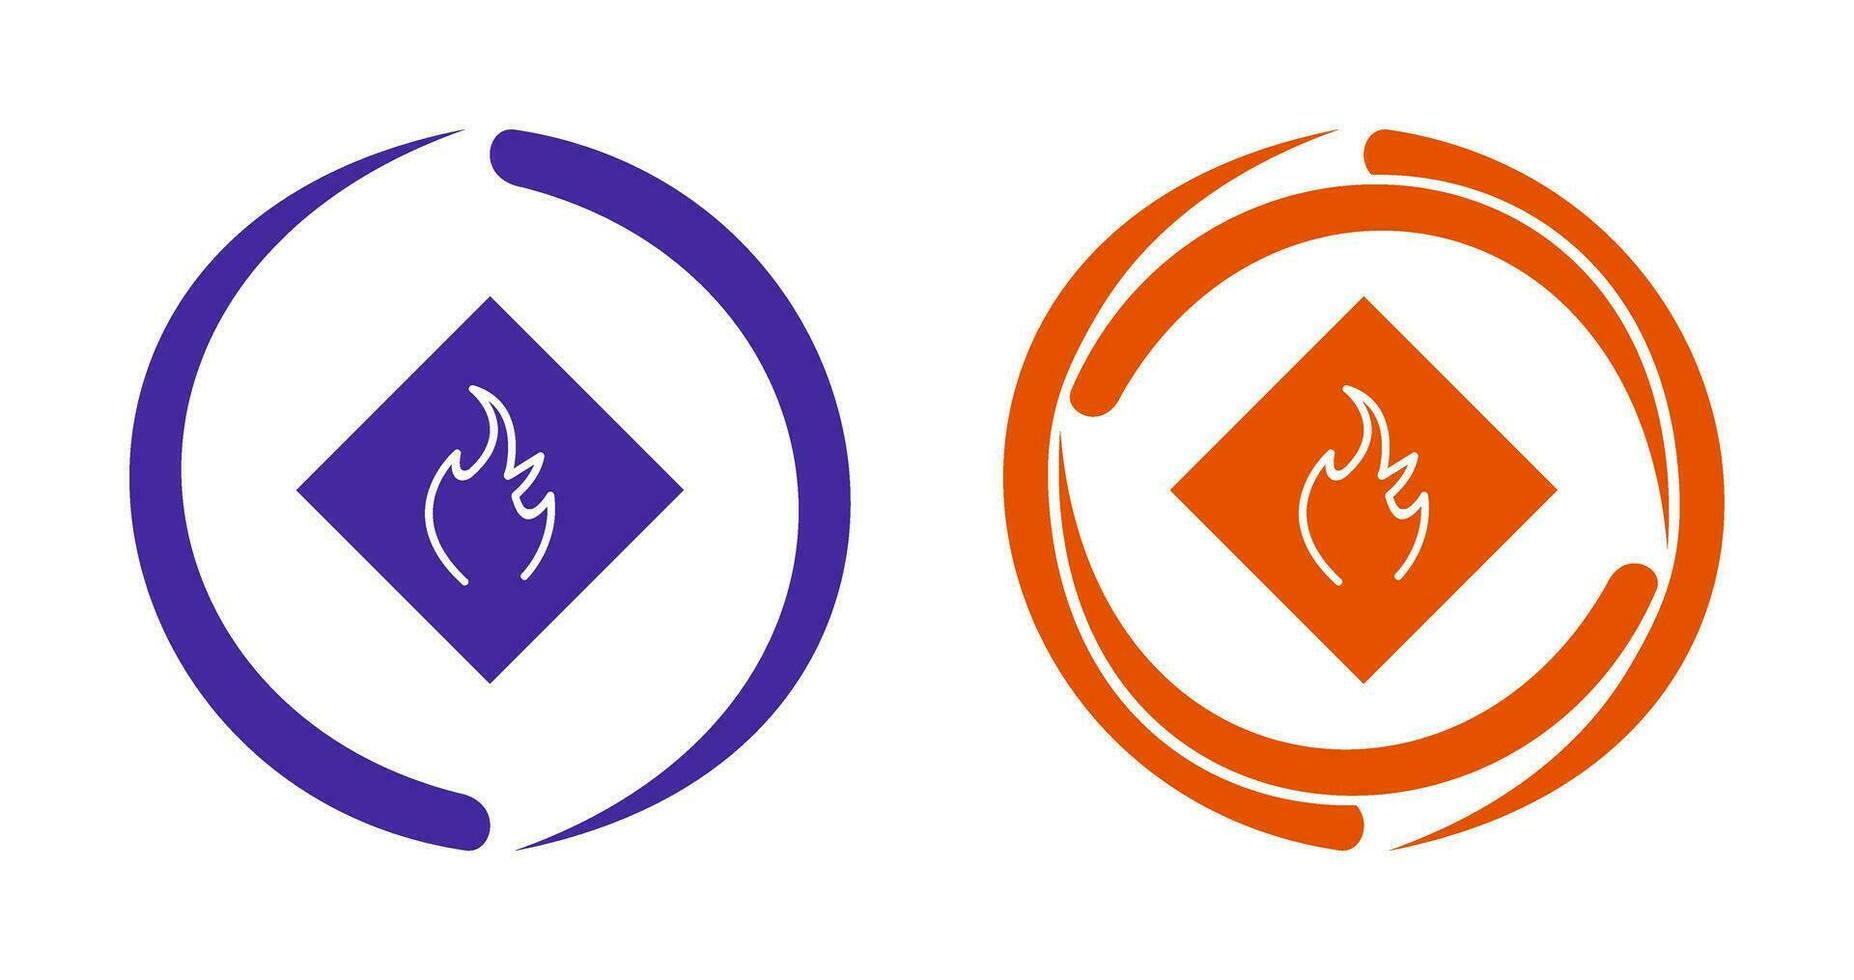 Danger of Flame Vector Icon